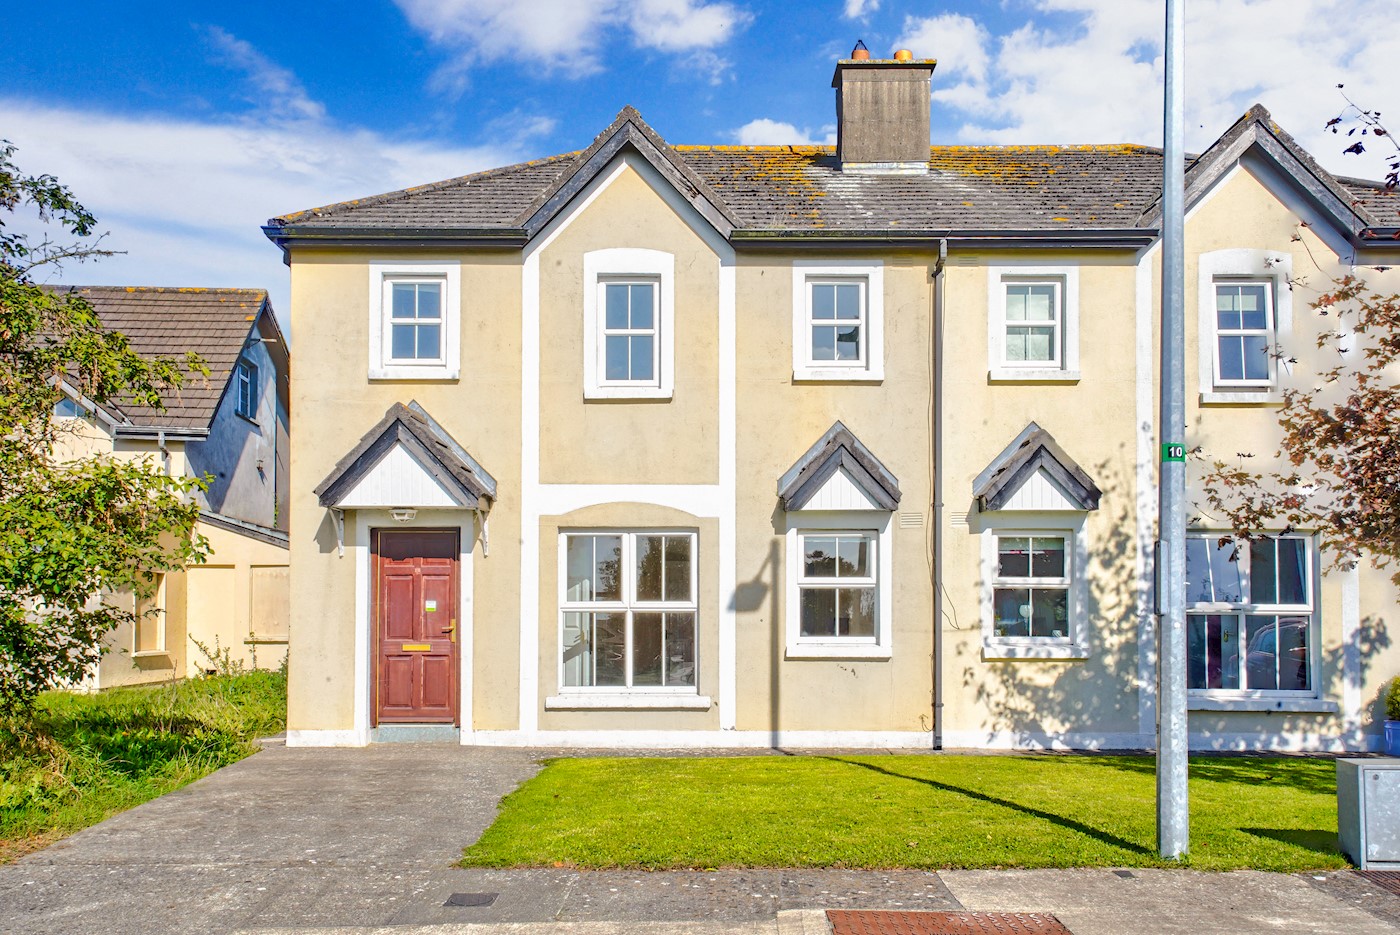 18 Coolcotts Court, Wexford Town, Co. Wexford, Y35 N2D2 1/18